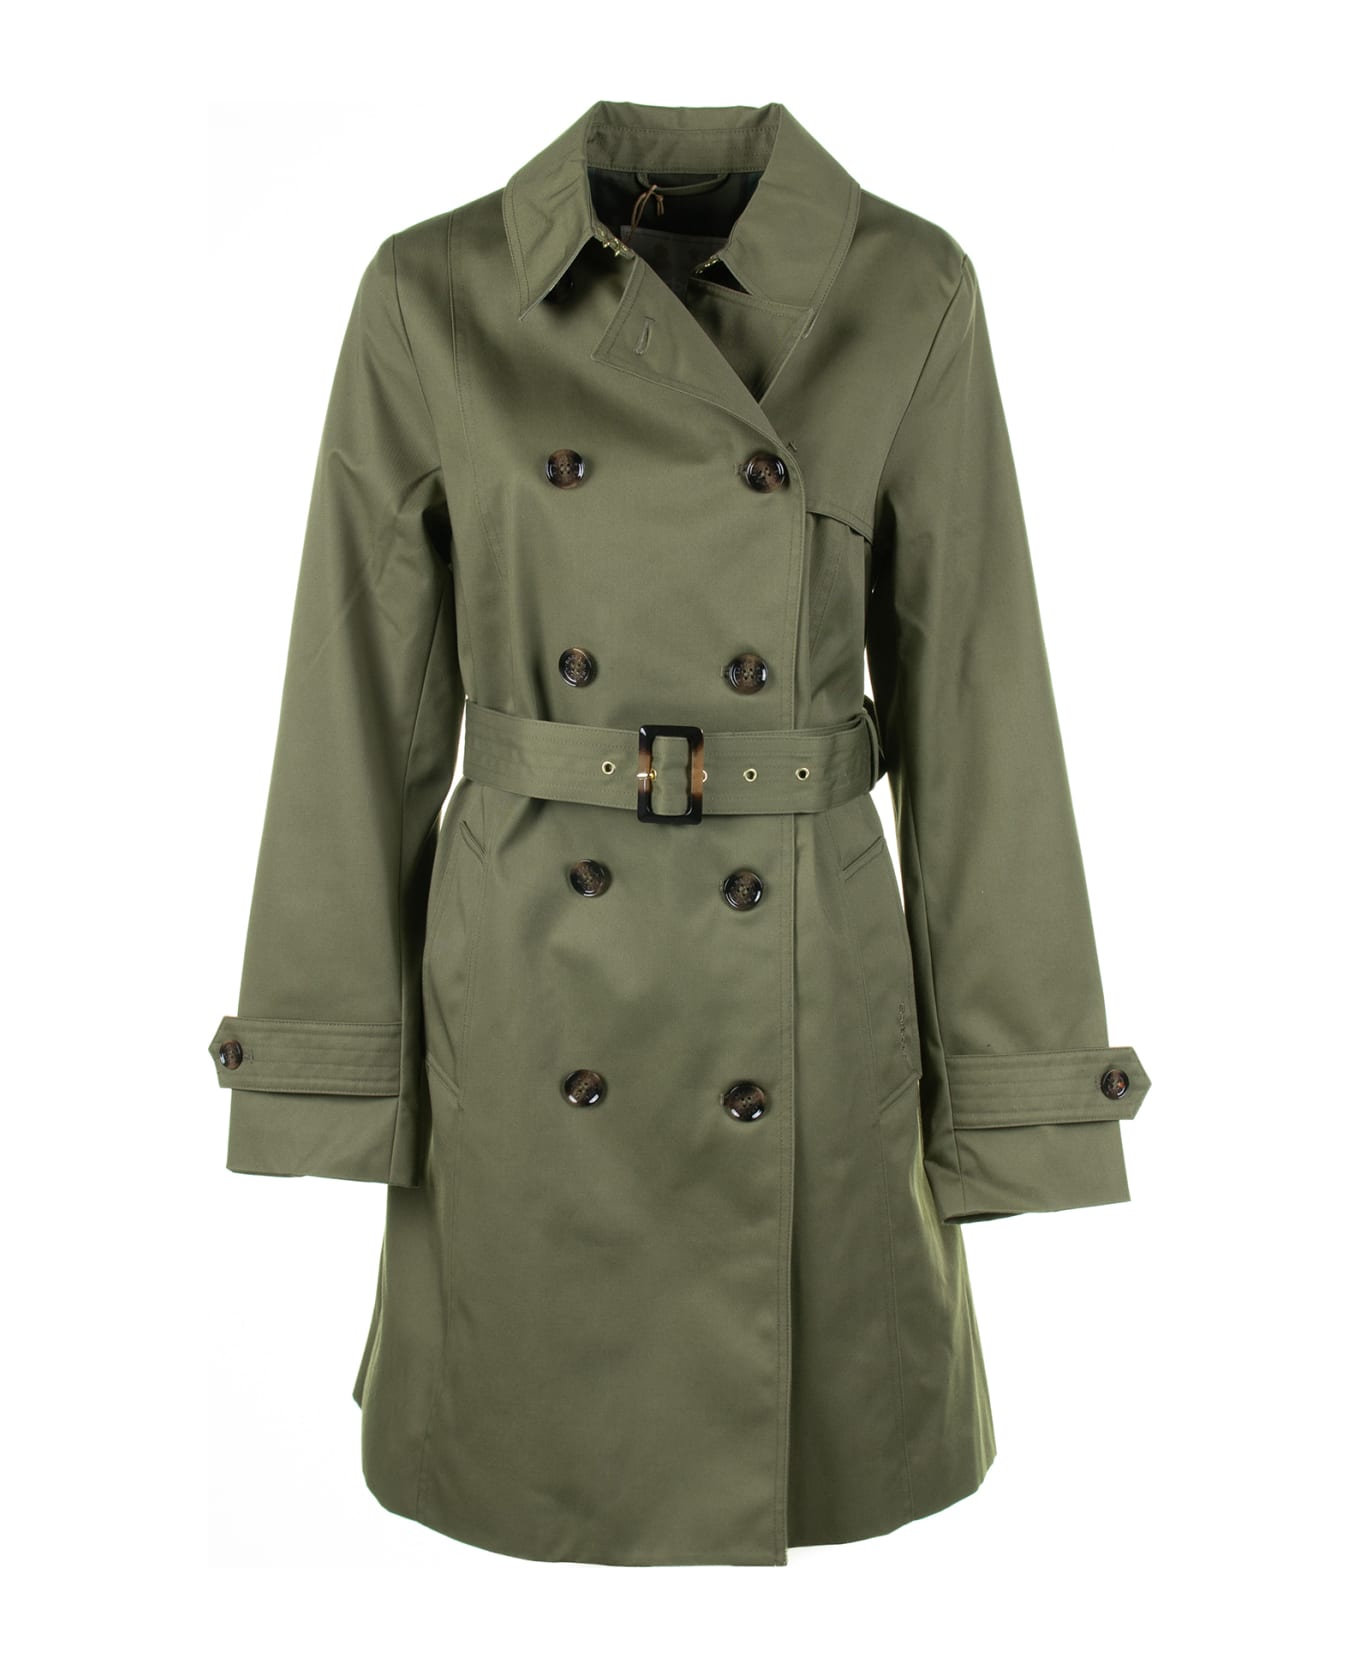 Barbour Green Waterproof Twill Trench Coat - BURNT OLIVE/ANCIENT POLAR レインコート